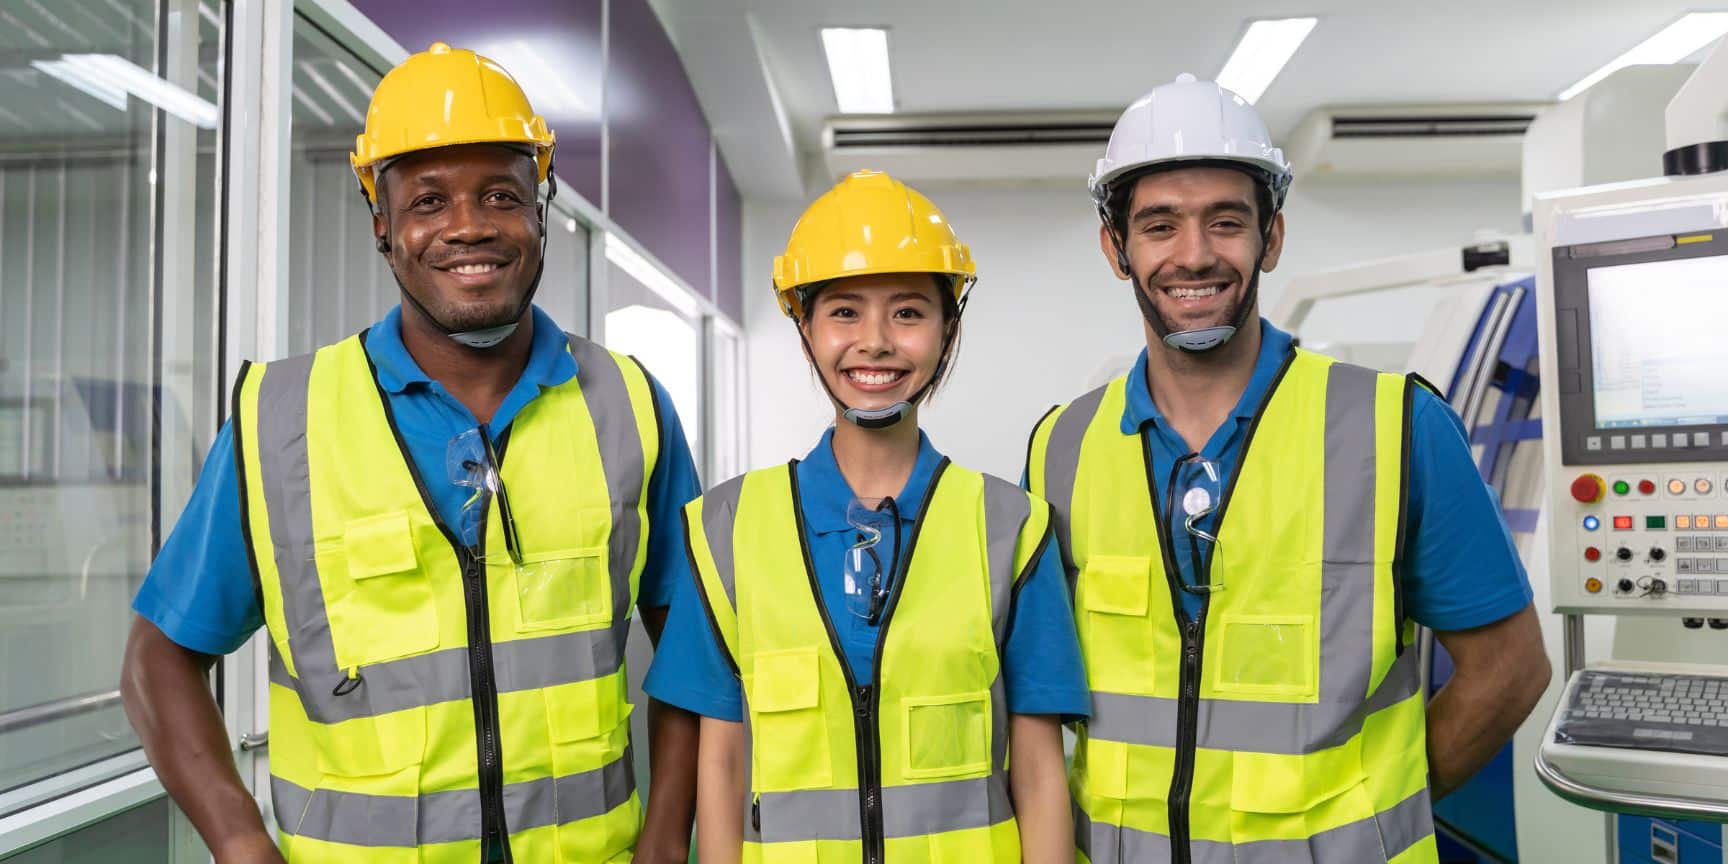 3 happy industrial workers wearing safety vests and hard hats